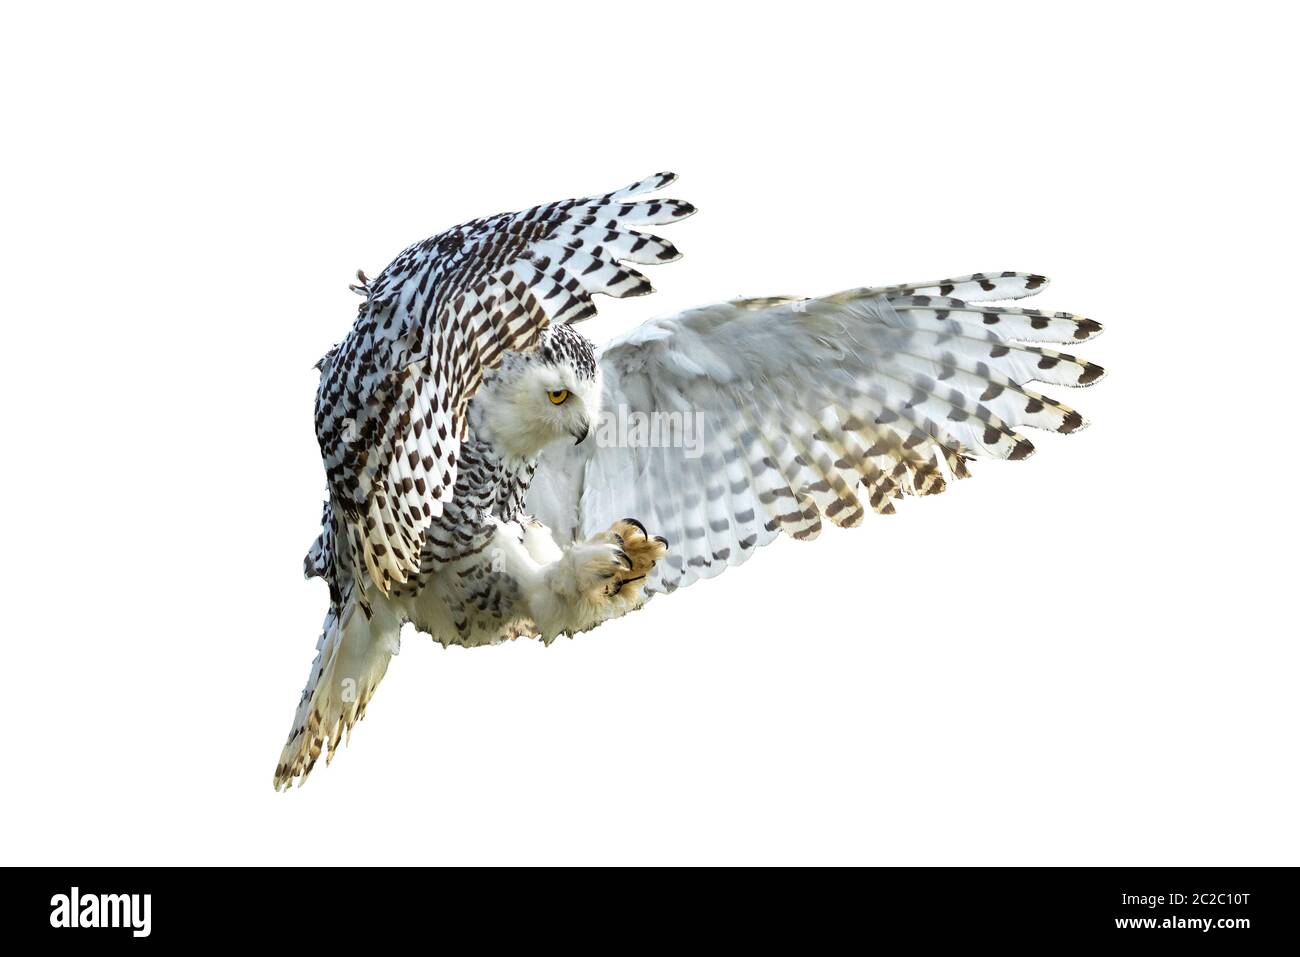 Snowy Owl with its wings outspread in flight cut out and isolate on a white background Stock Photo